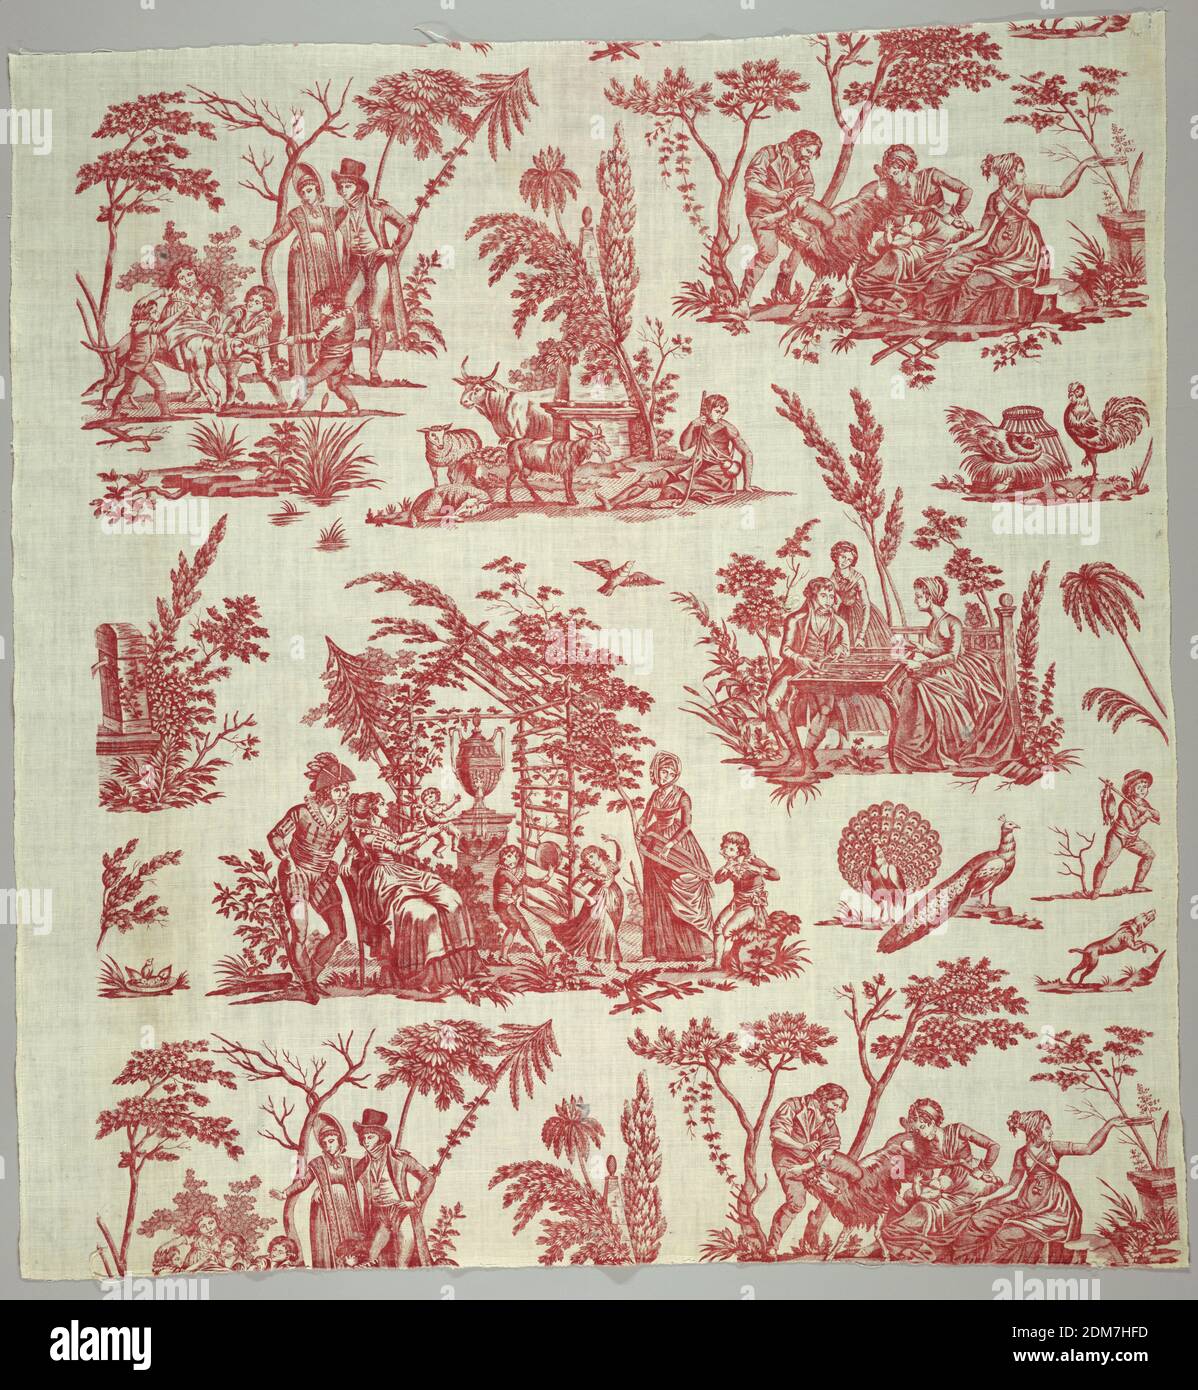 Textile, Medium: cotton Techinque: printed by engraved copper plate on plain weave, Pastoral scenes including man and woman watching children play with a dog, two women, a man and a goat suckling a baby, a couple playing backgammon, and a family group in an arbor. In red., Nantes, France, ca. 1800, printed, dyed & painted textiles, Textile Stock Photo